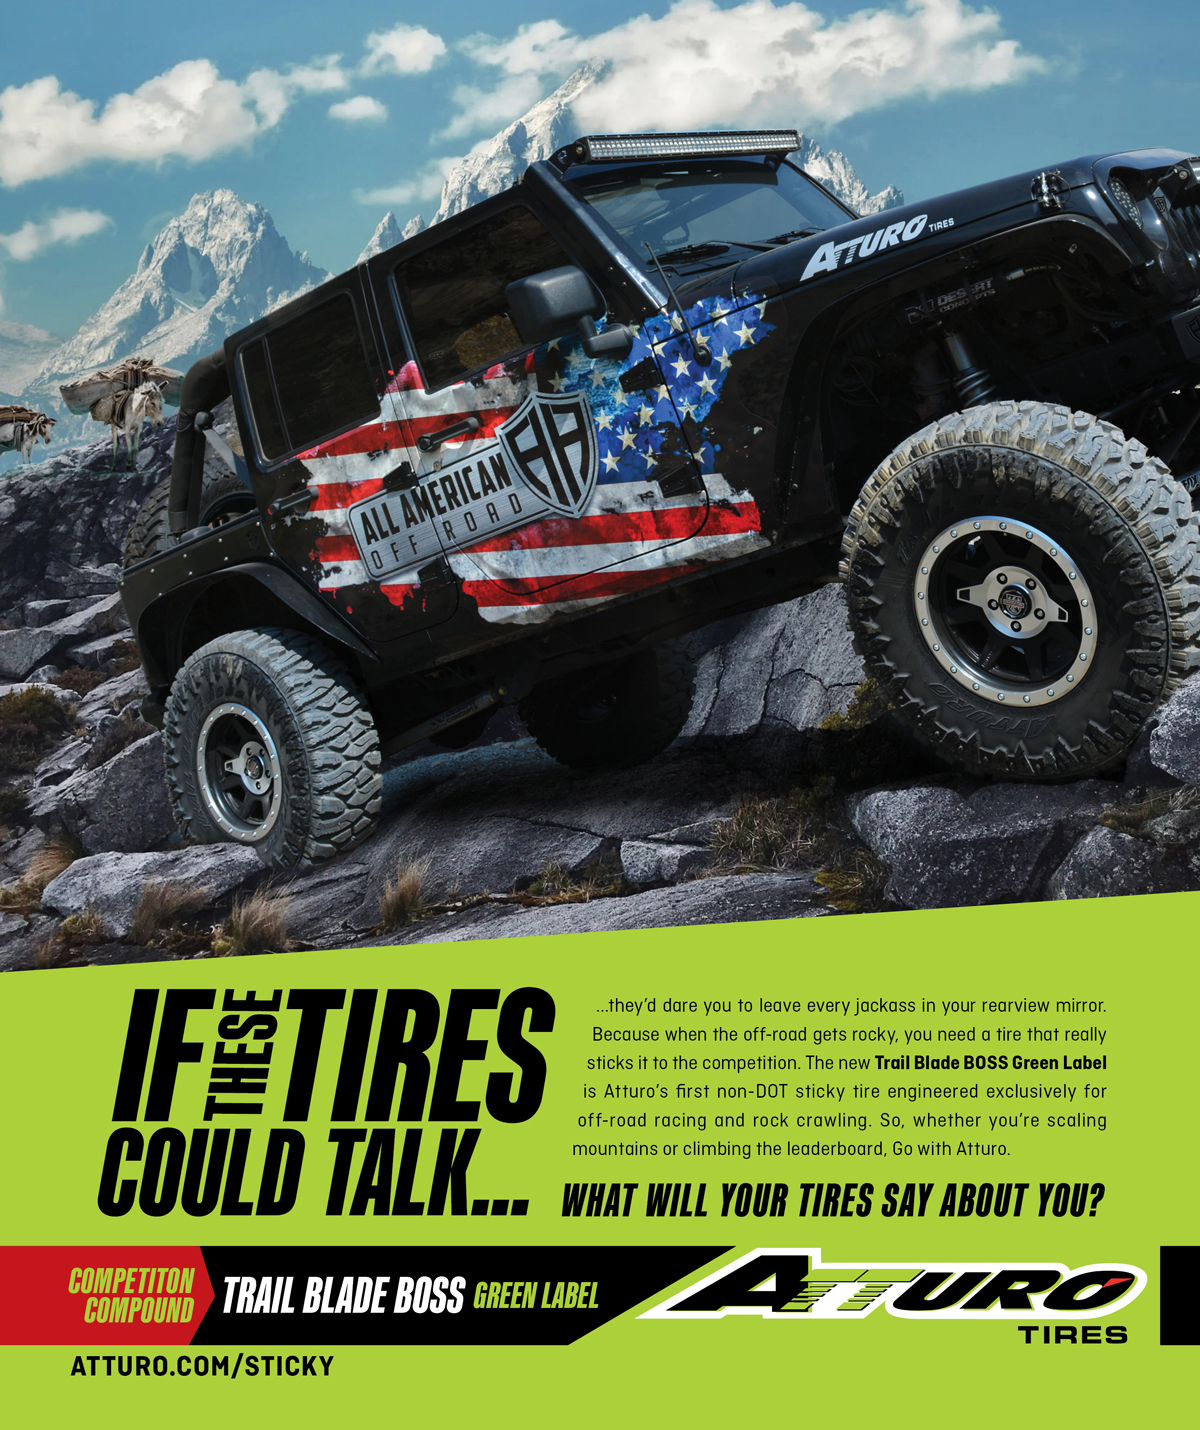 Atturo Tires - Print Ad - If These Tires Could Talk - Trail Blade BOSS